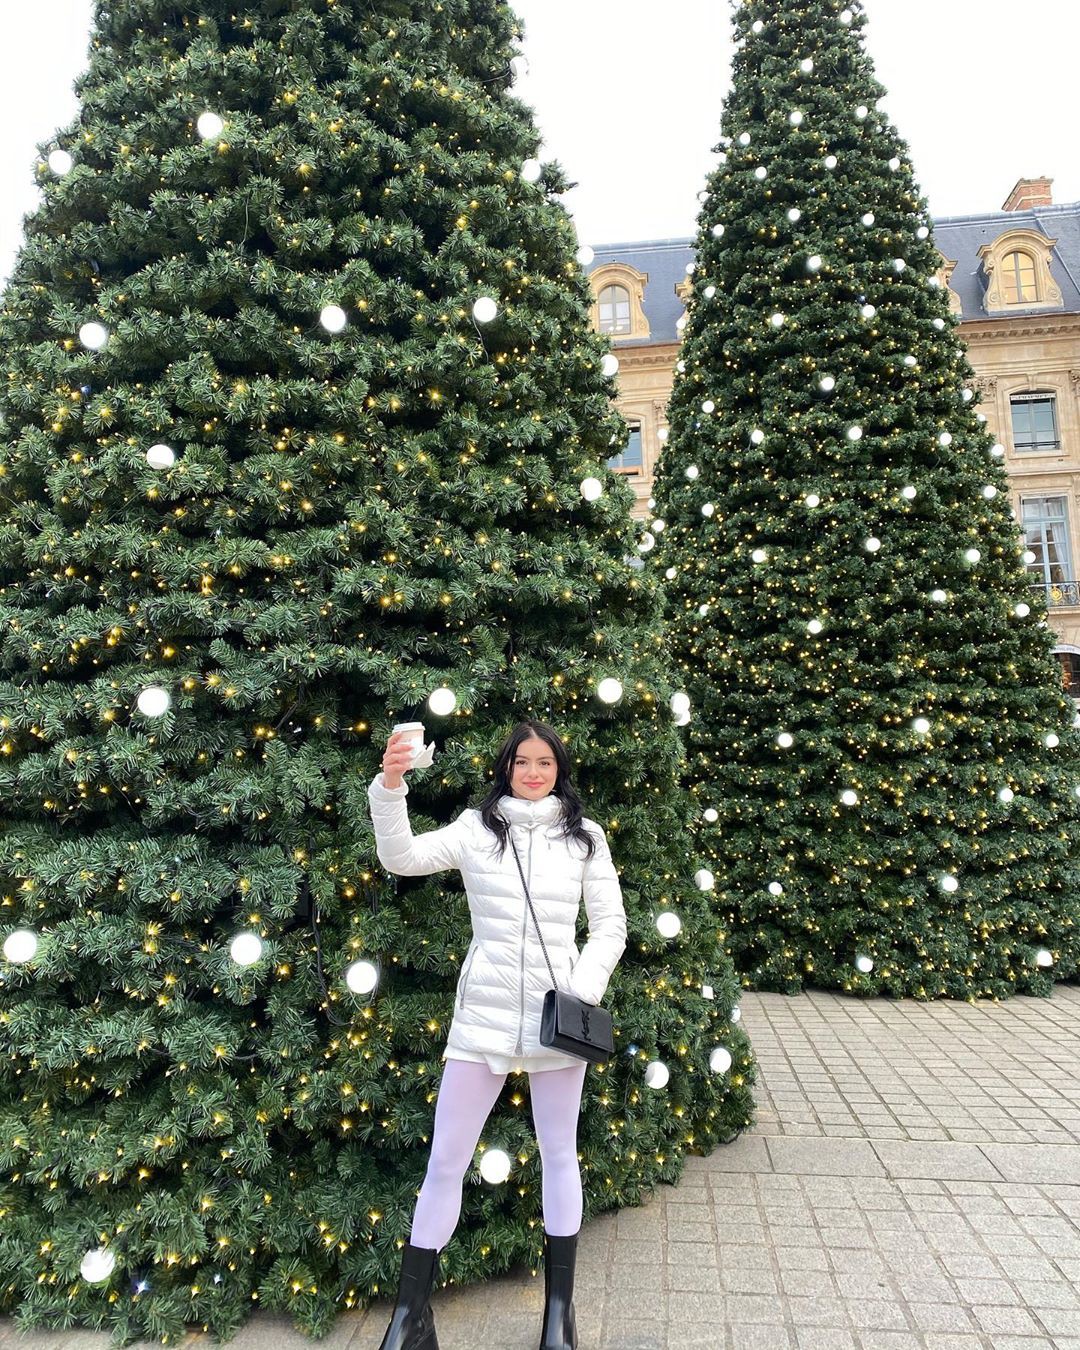 Pretty ideas for christmas tree, The Christmas Chronicles: Christmas Day,  Christmas tree,  Christmas decoration,  Ariel Winter,  Hot Instagram Models  